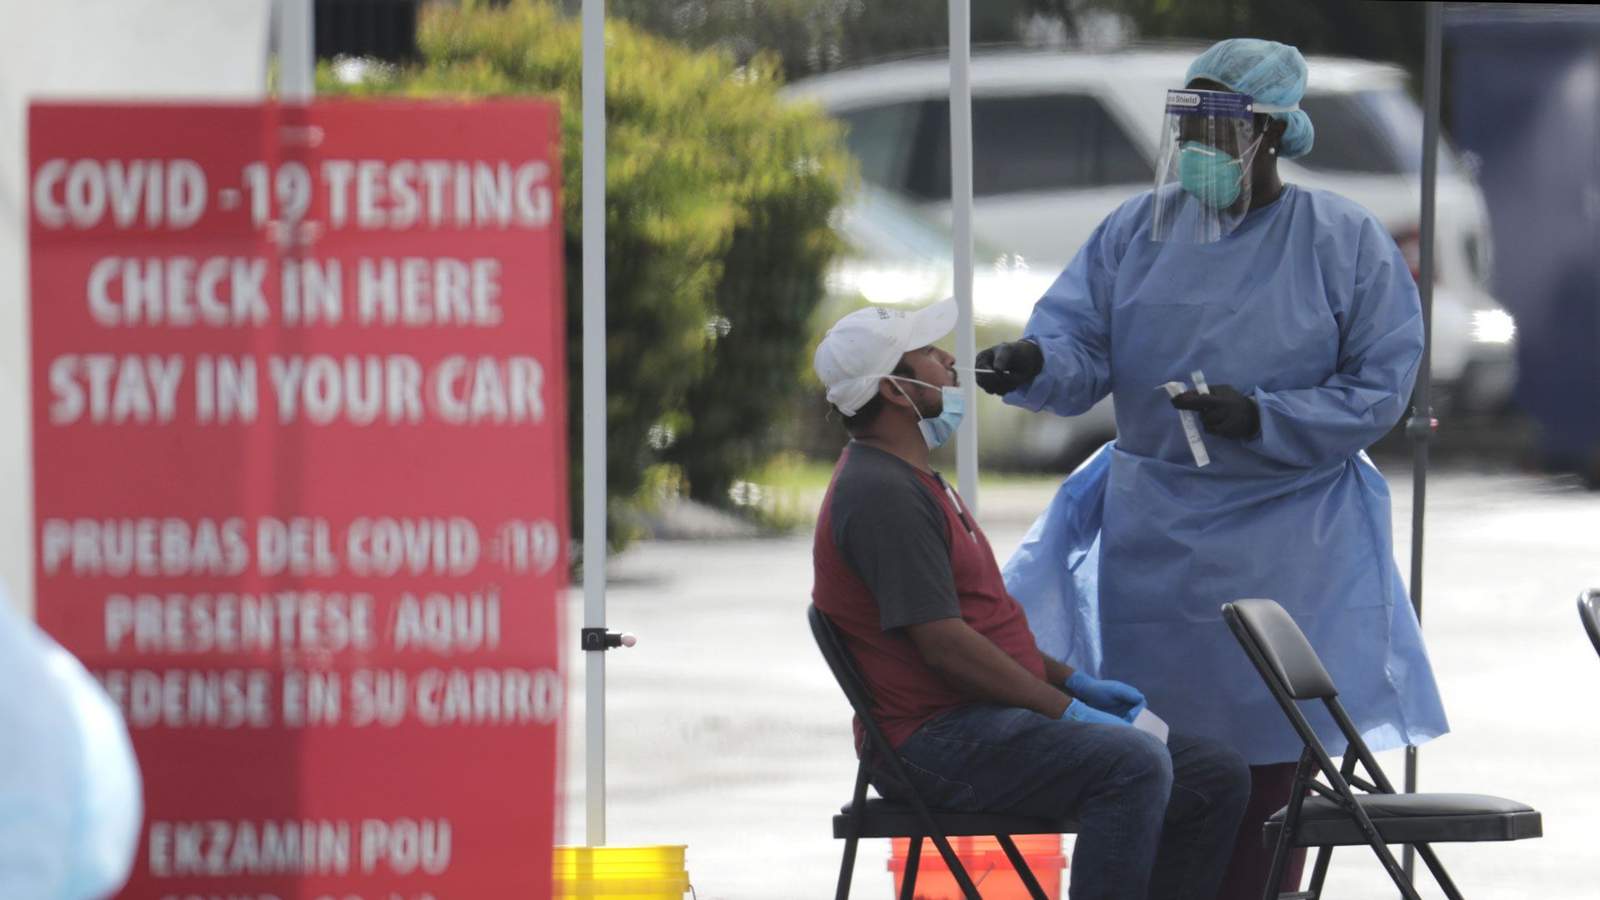 Now in final stage of reopening, Florida reports 738 new COVID-19 cases, 5 deaths